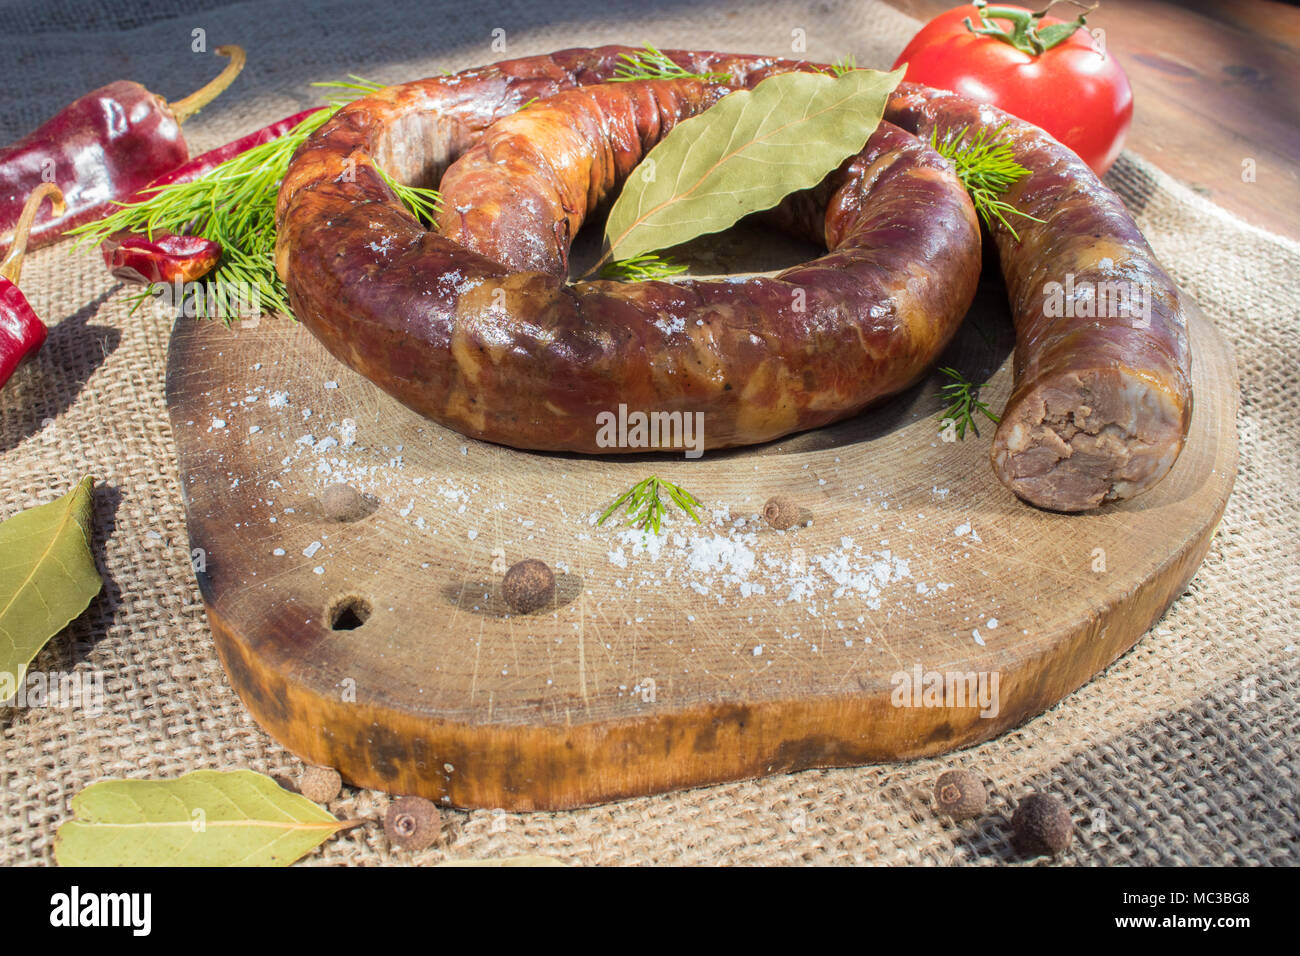 A ring of cooked sausage on the grill. Next to it is a tomato Stock Photo